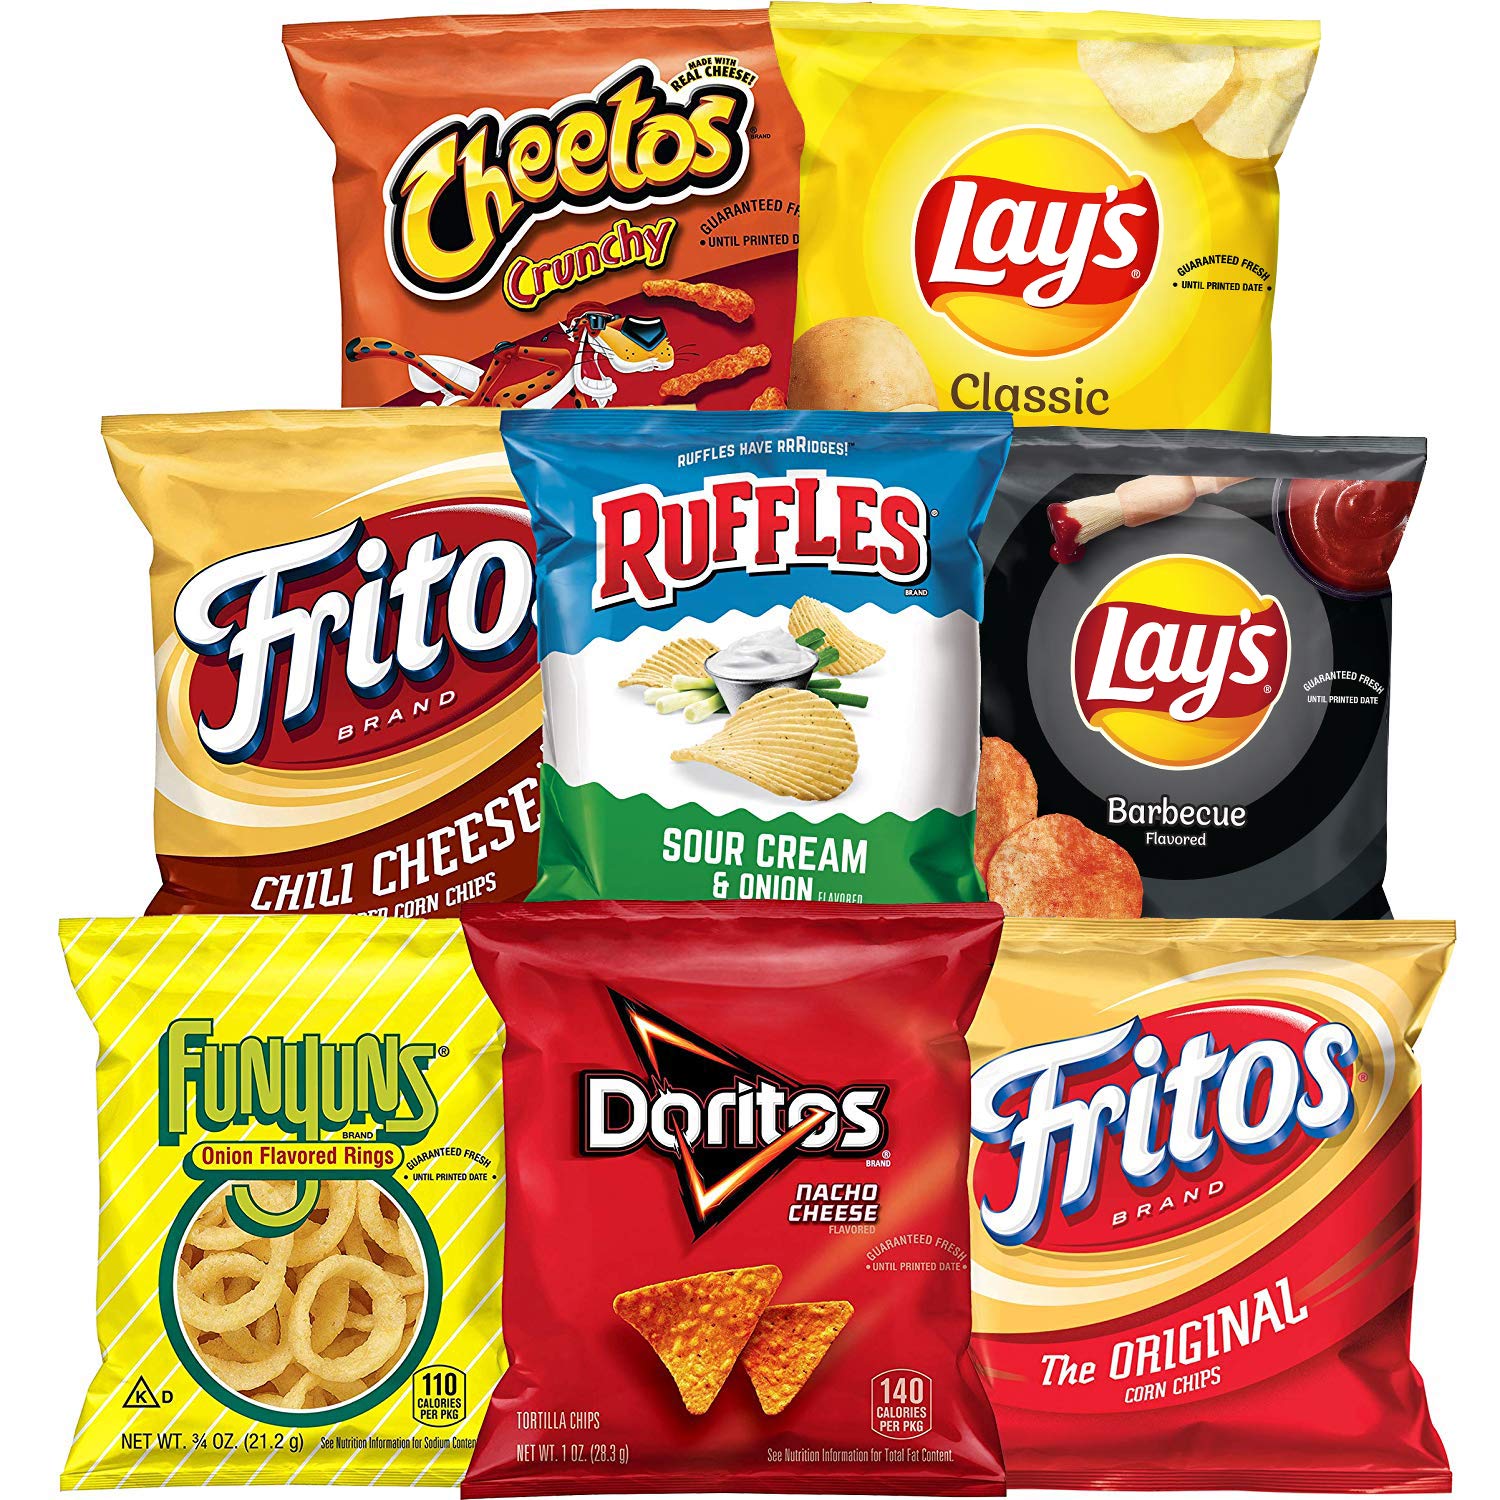 Frito Lay Chips On Sale For Amazon Prime Day! Stock Up!